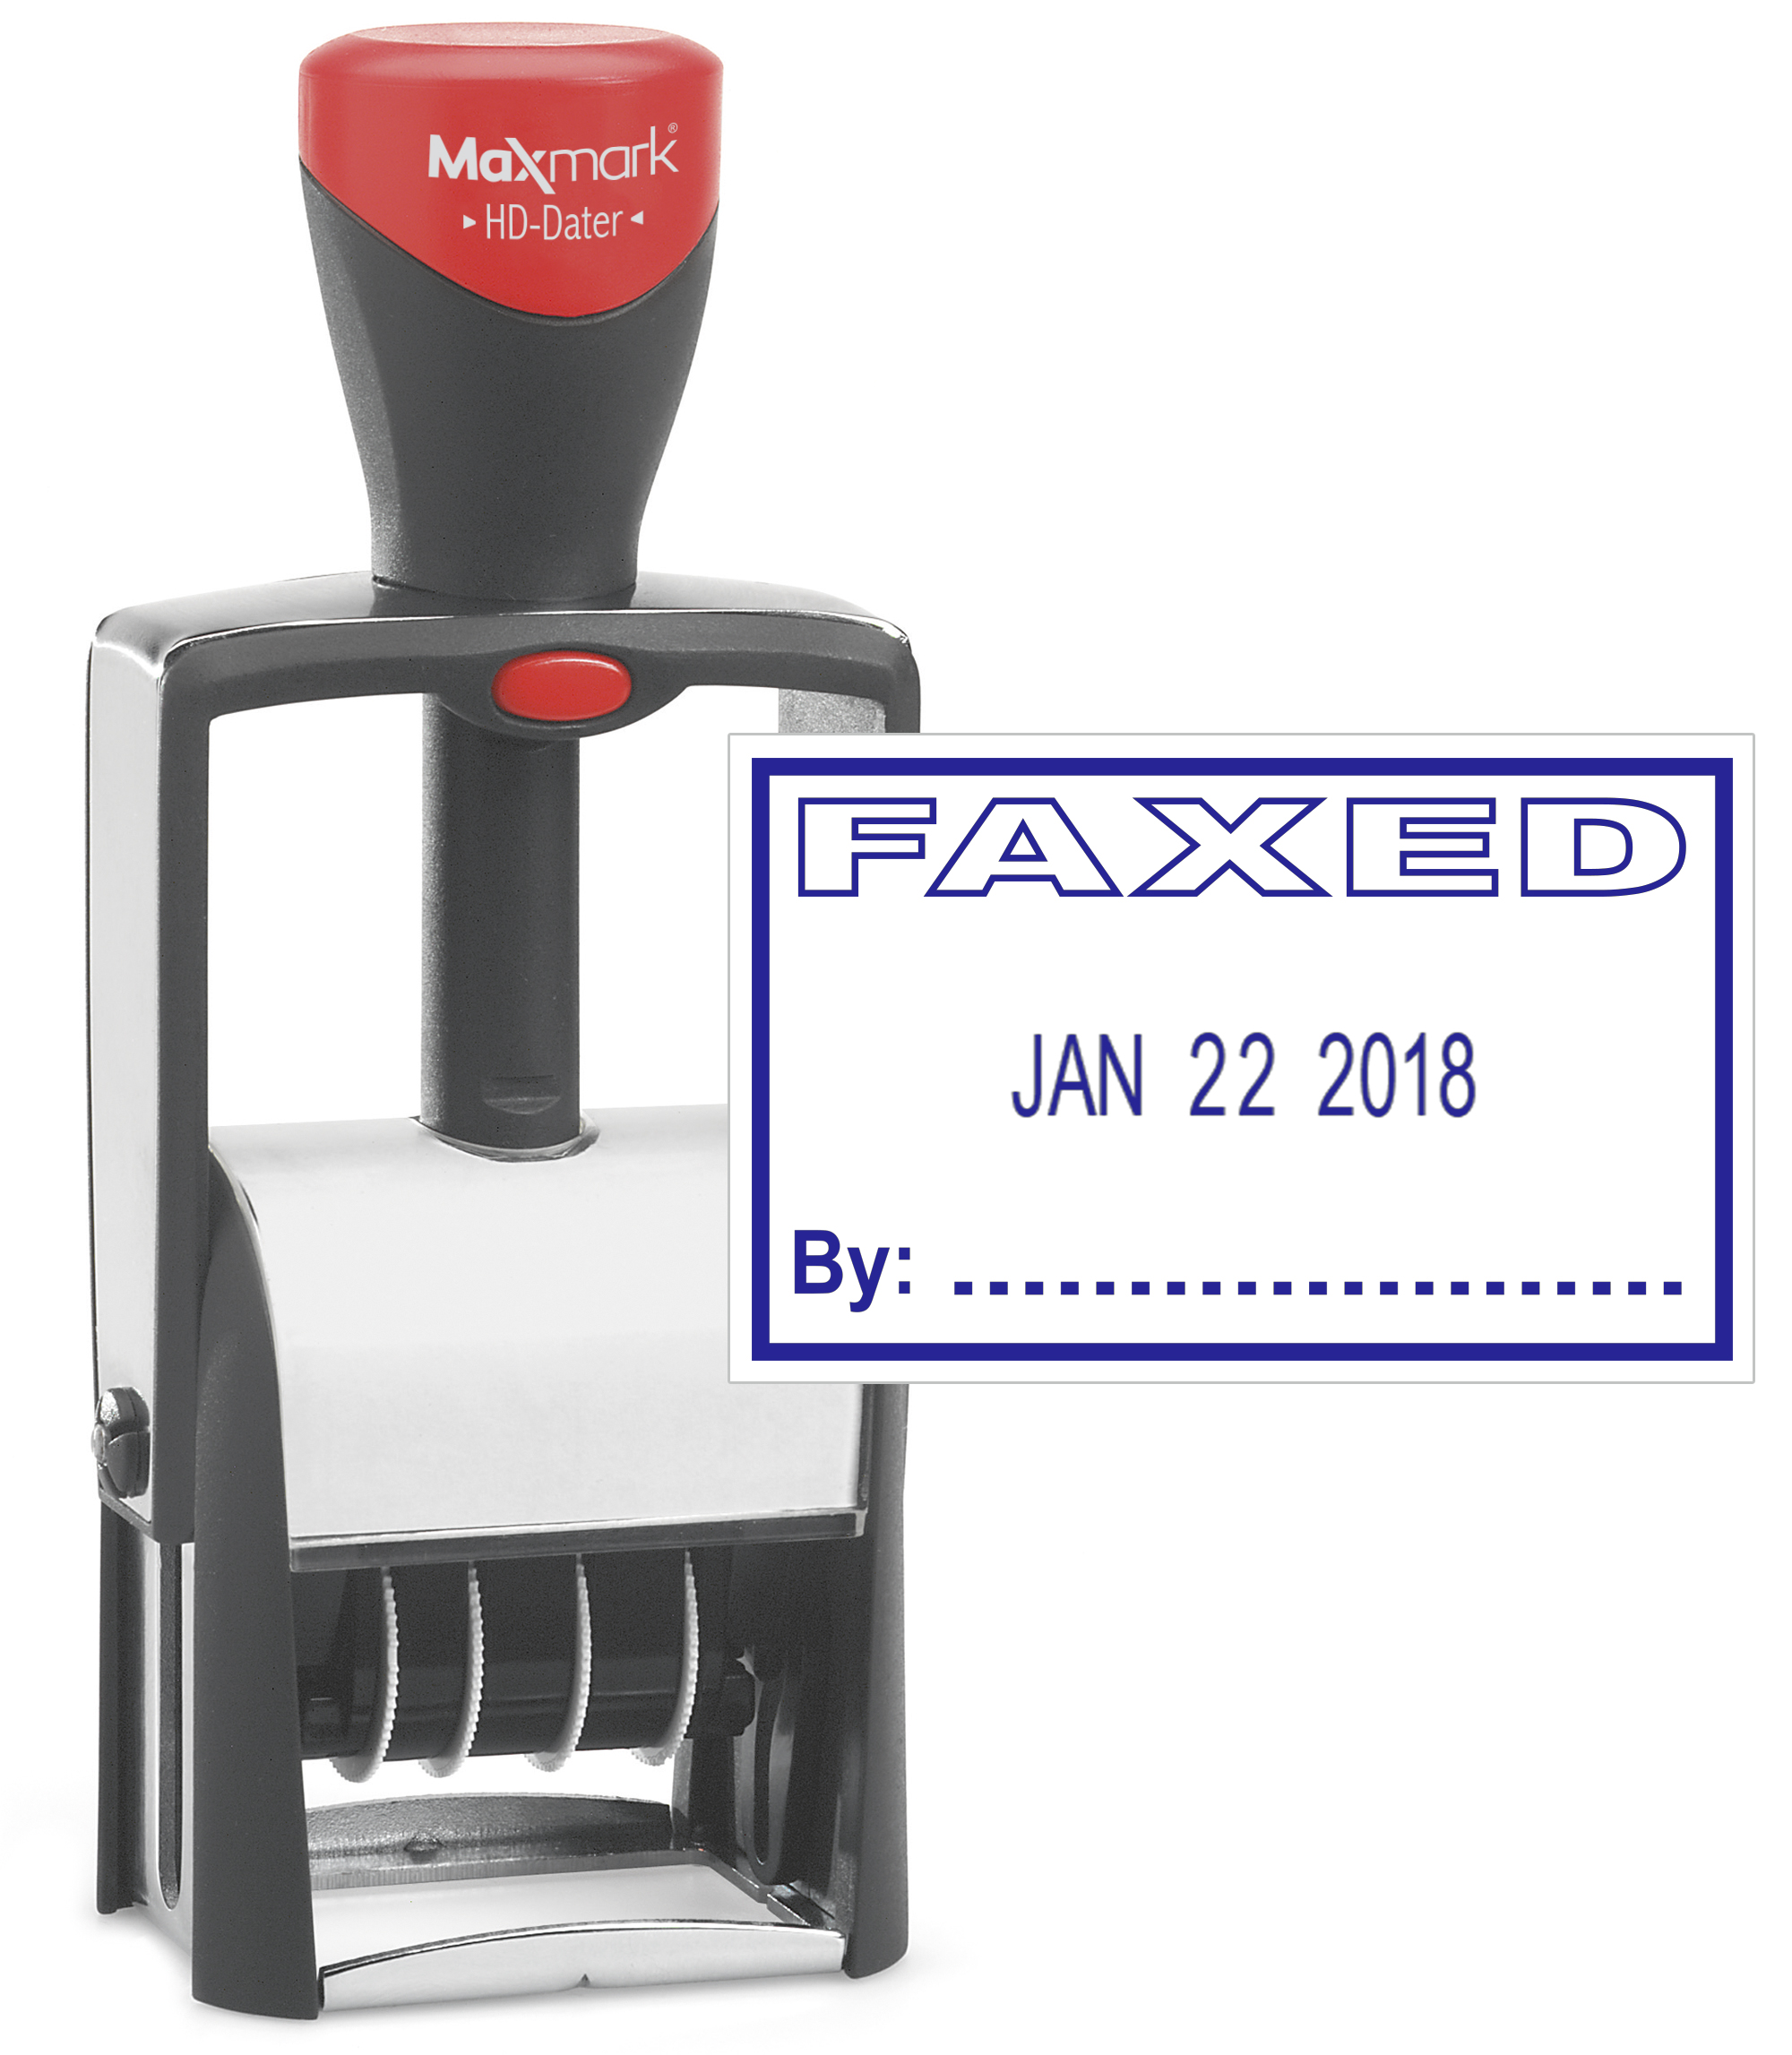 Heavy Duty Date Stamp with "FAXED" Self Inking Stamp - BLUE Ink